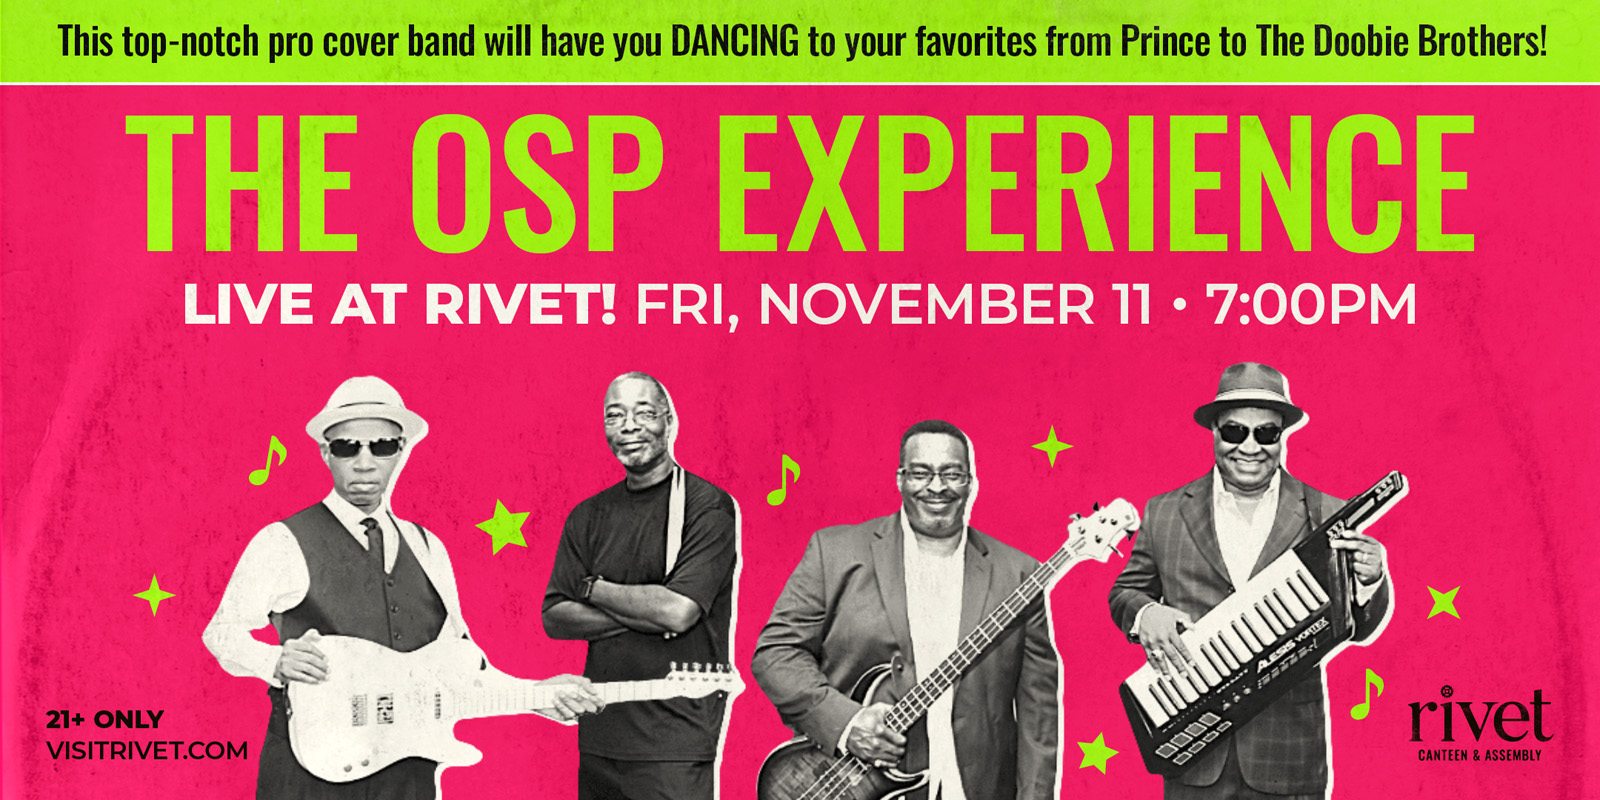 Back again by popular demand! The OSP Experience will be performing live at Rivet: Canteen & Assembly on Friday, November 11th, 2022.